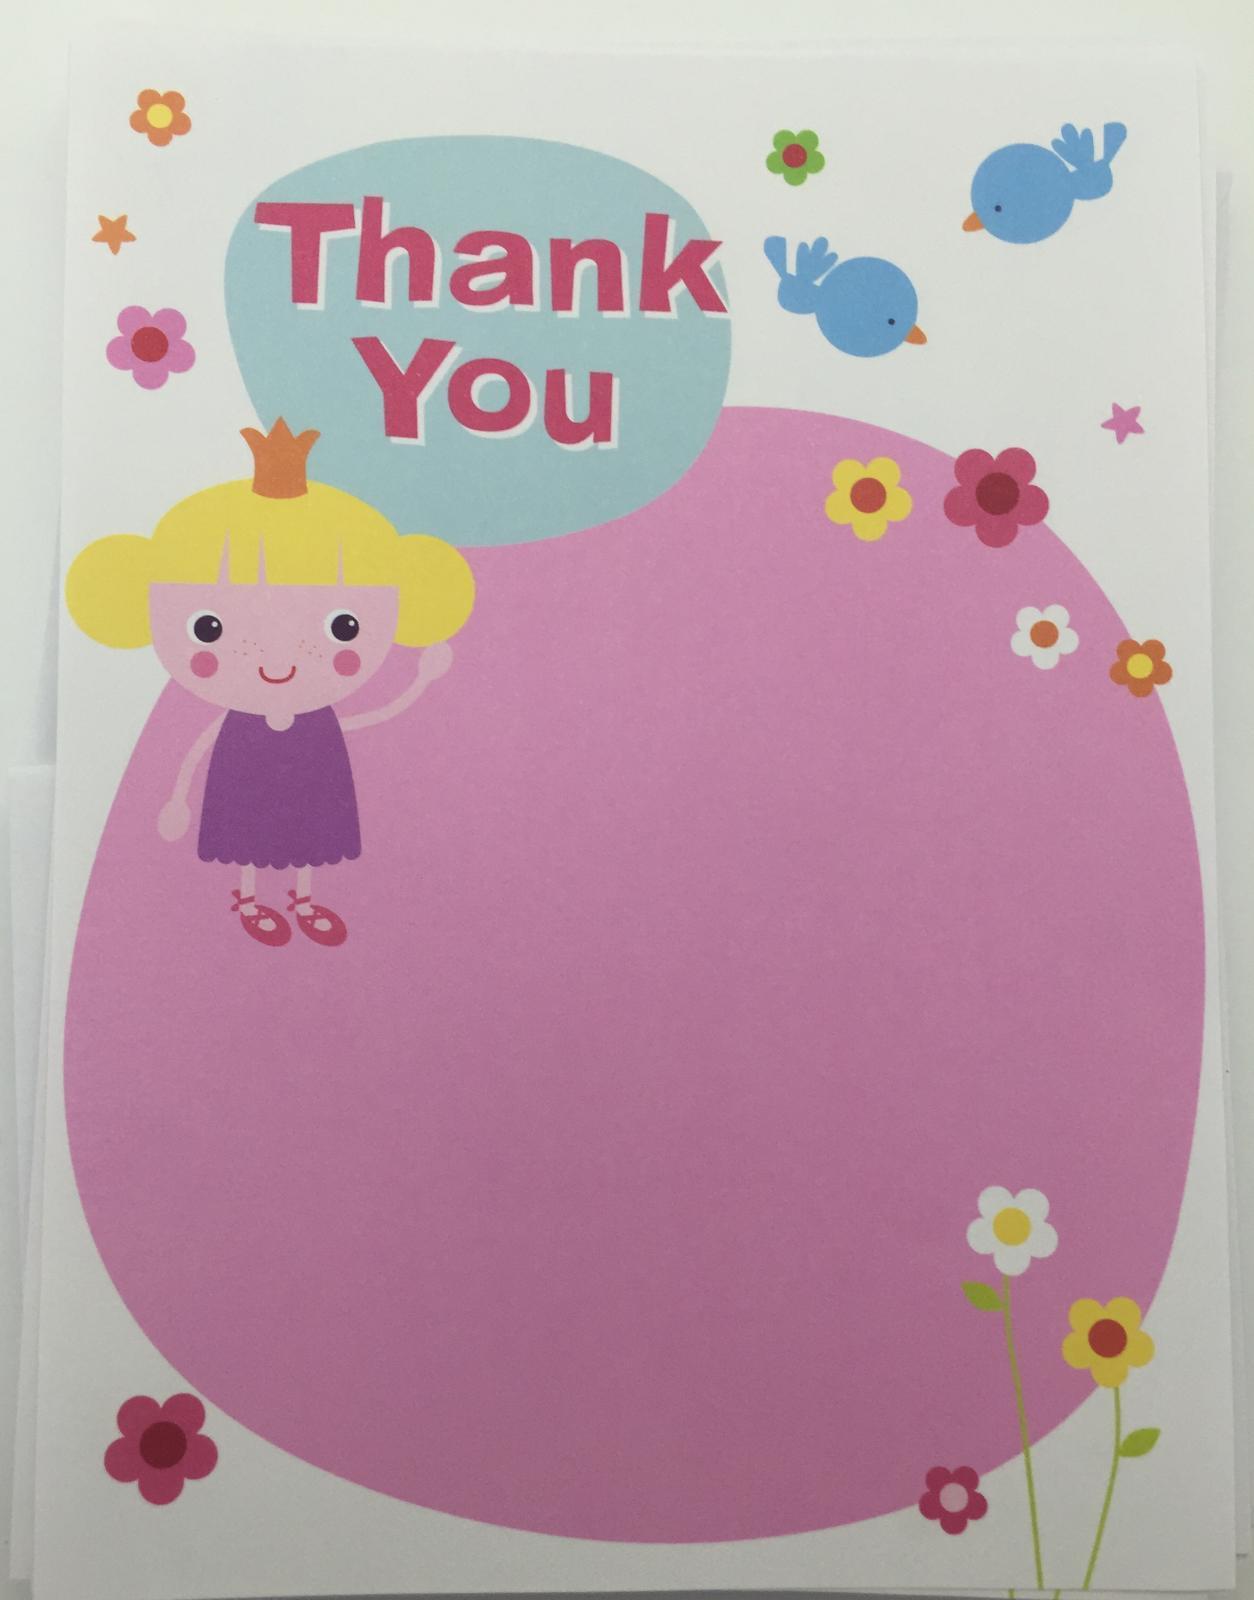 Pack of 20 Girls Pink Thank You Sheets and Envelopes by Carlton Cards 